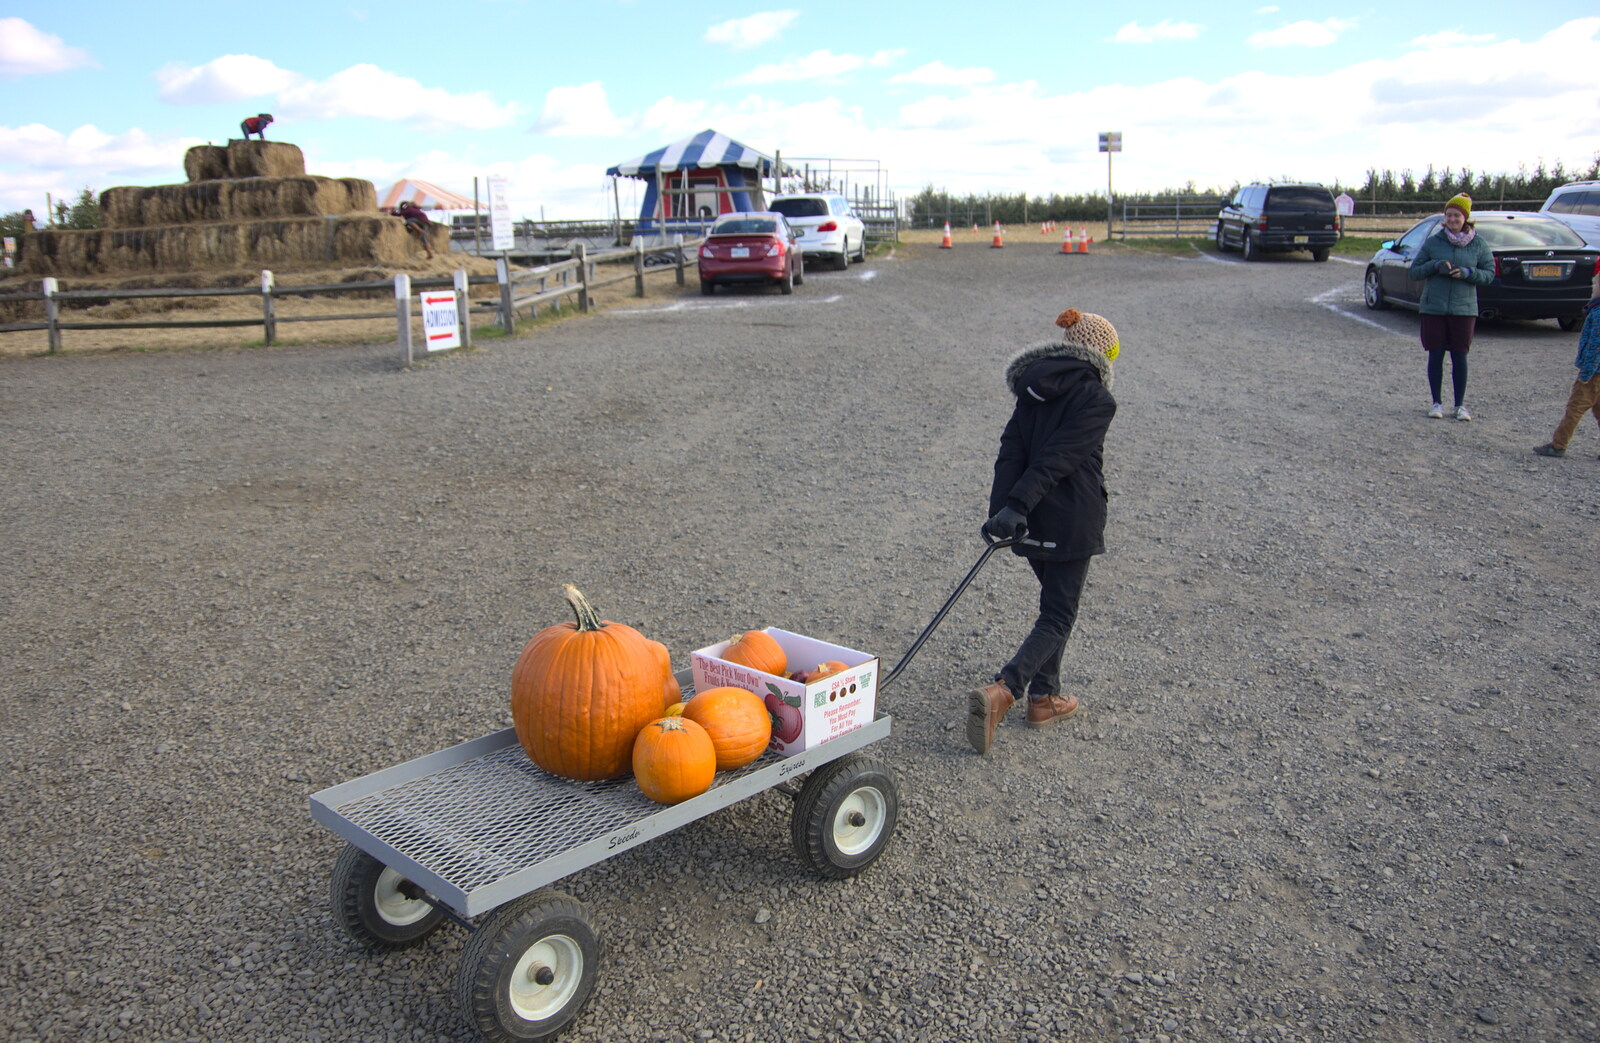 Fred hauls our collection to the car from Pumpkin Picking at Alstede Farm, Chester, Morris County, New Jersey - 24th October 2018